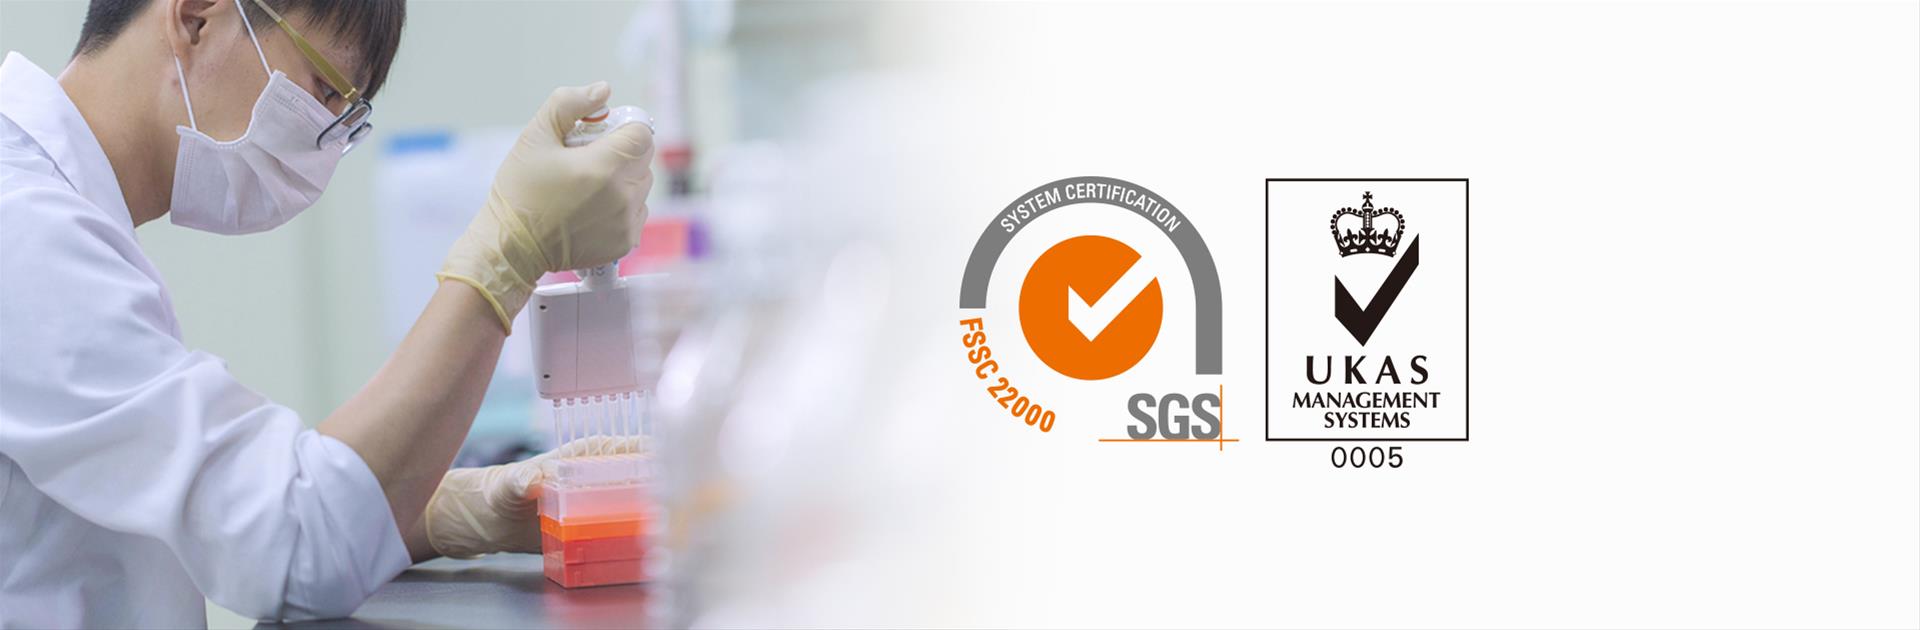 SYNBIO TECH INC. successfully passed the FSSC 22000 certification audit